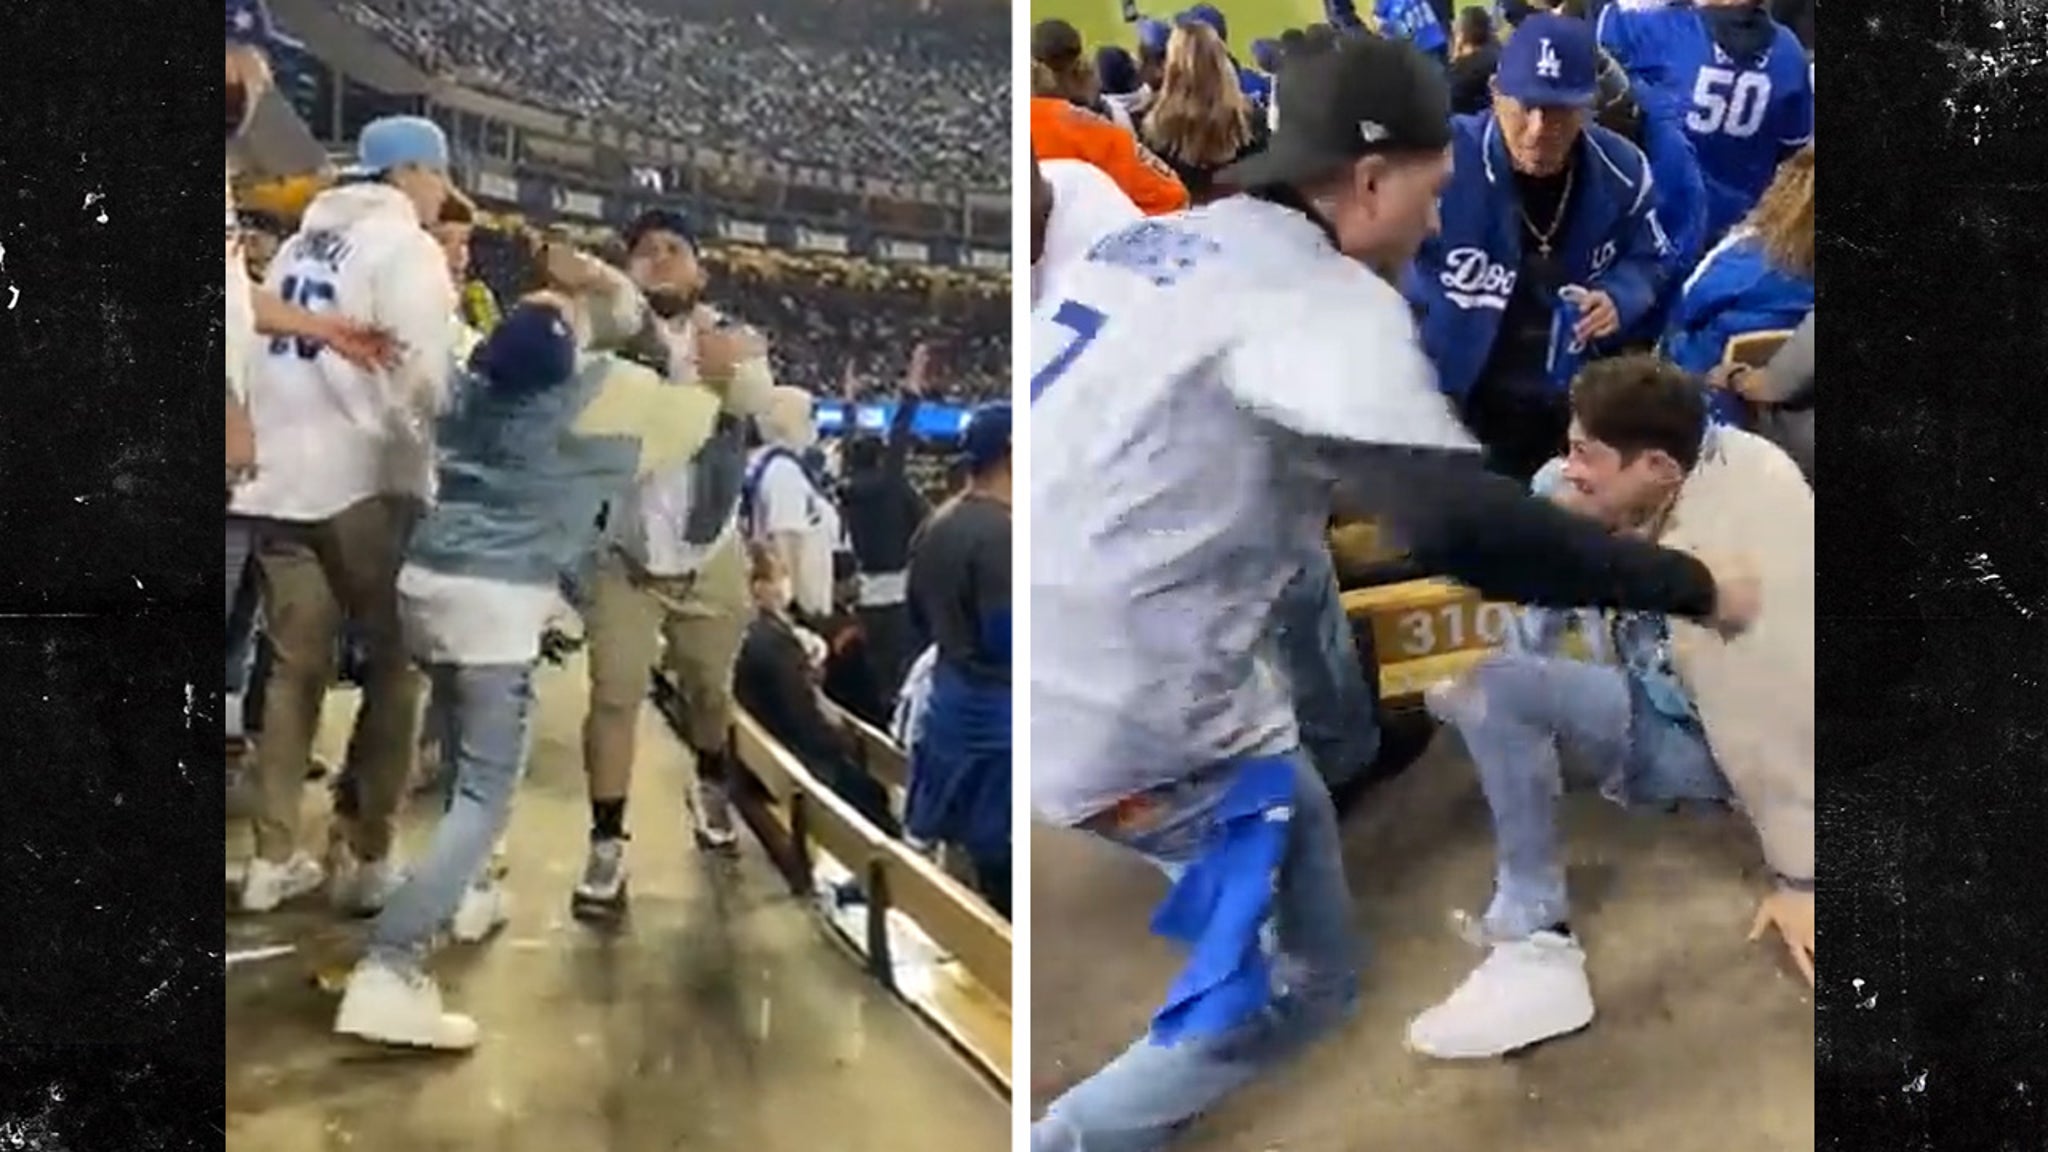 Dodgers Fans Throw Punches At Each Other In Wild Skirmish At Giants Game